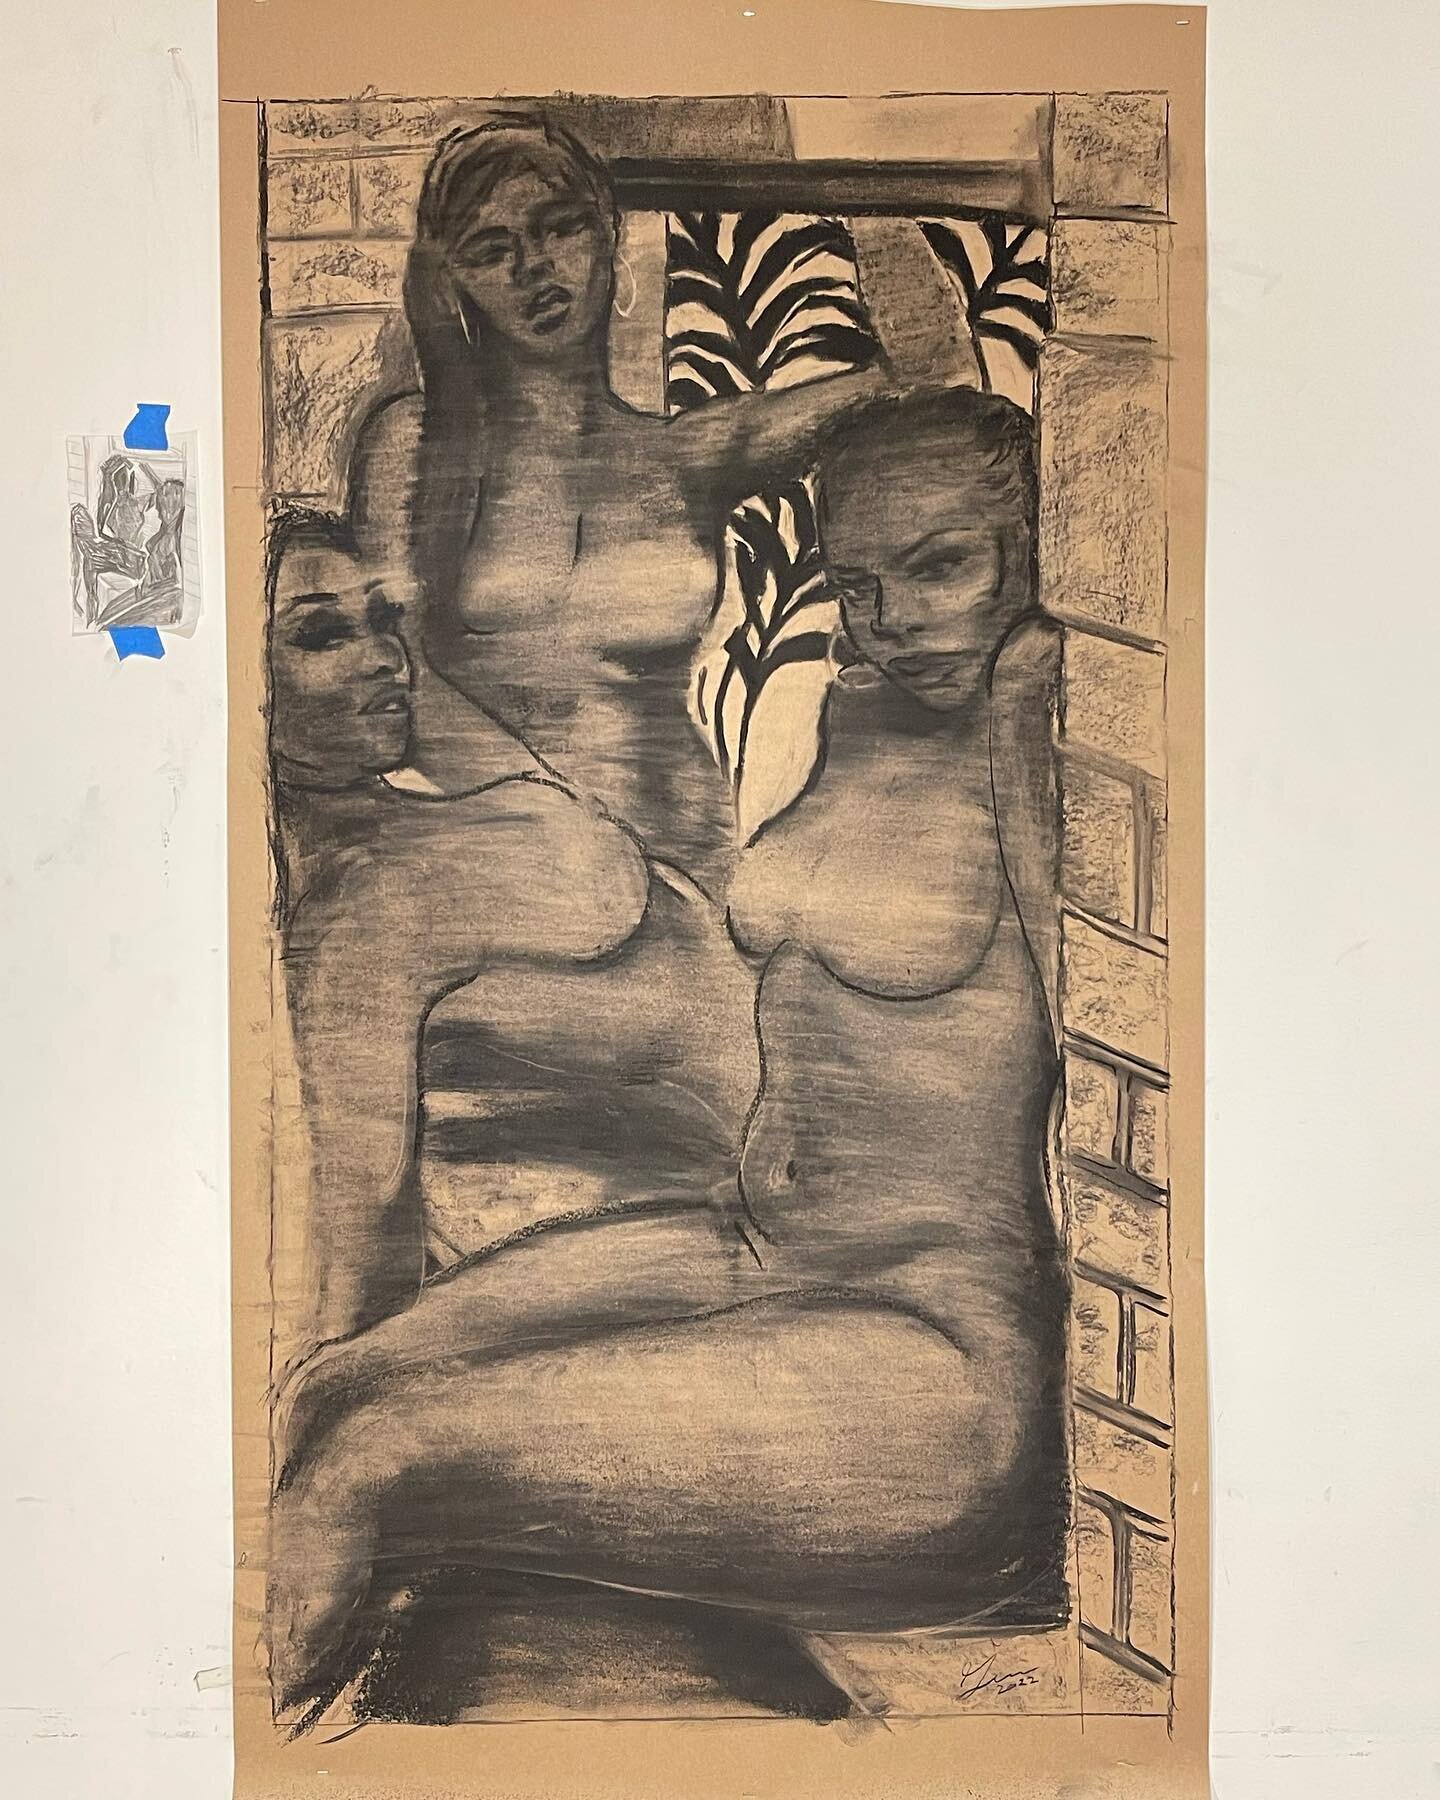 &ldquo;Untitled&rdquo; 2022

Charcoal study on wrapping paper 

First study into 2022, fresh out of quarantine.